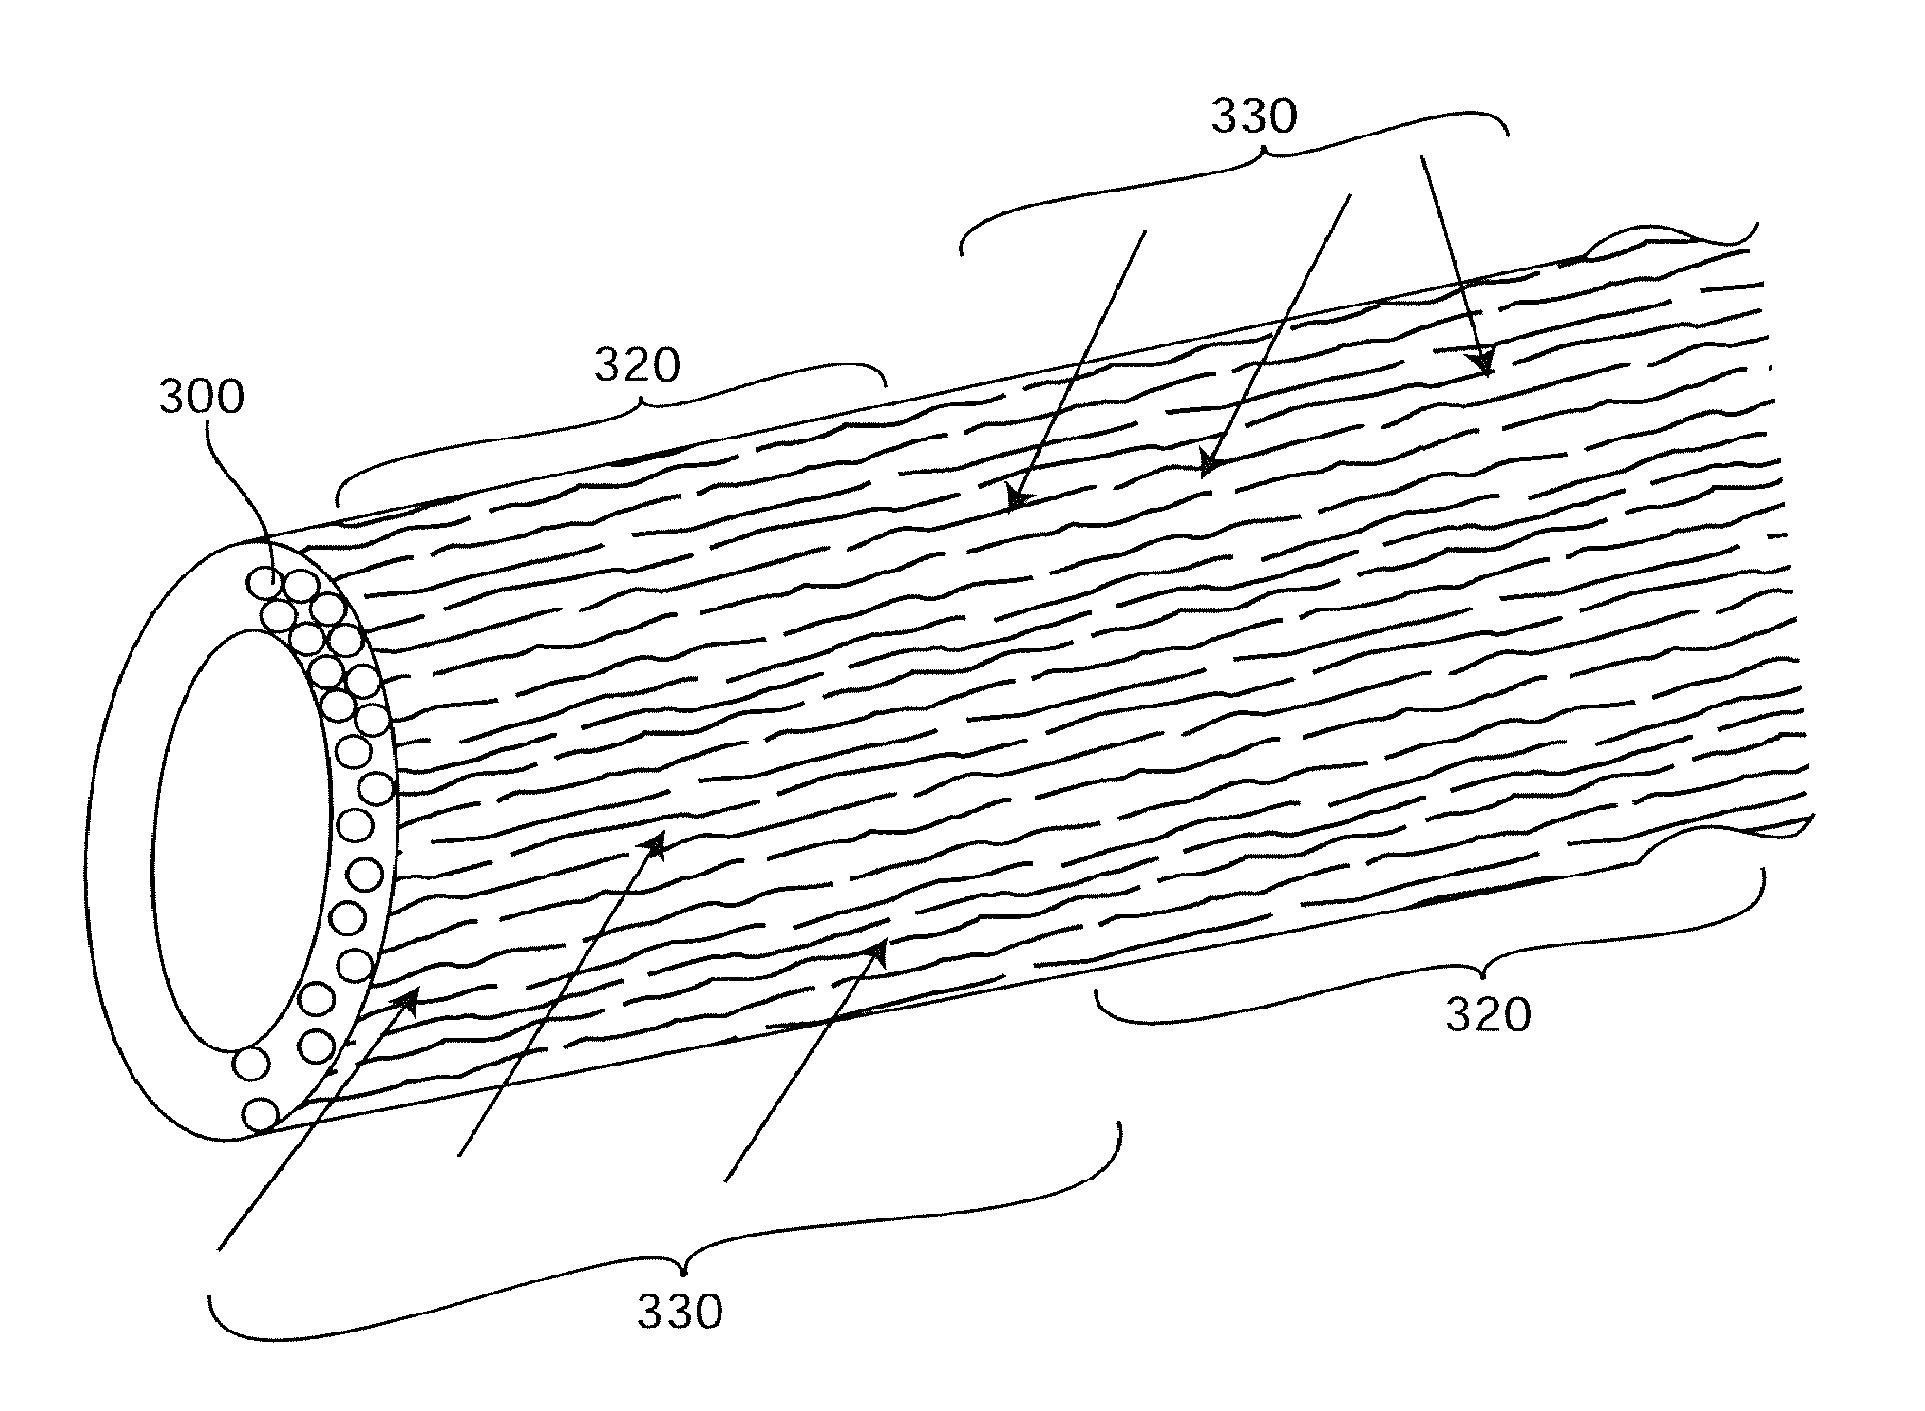 Air impedance electrospinning for controlled porosity